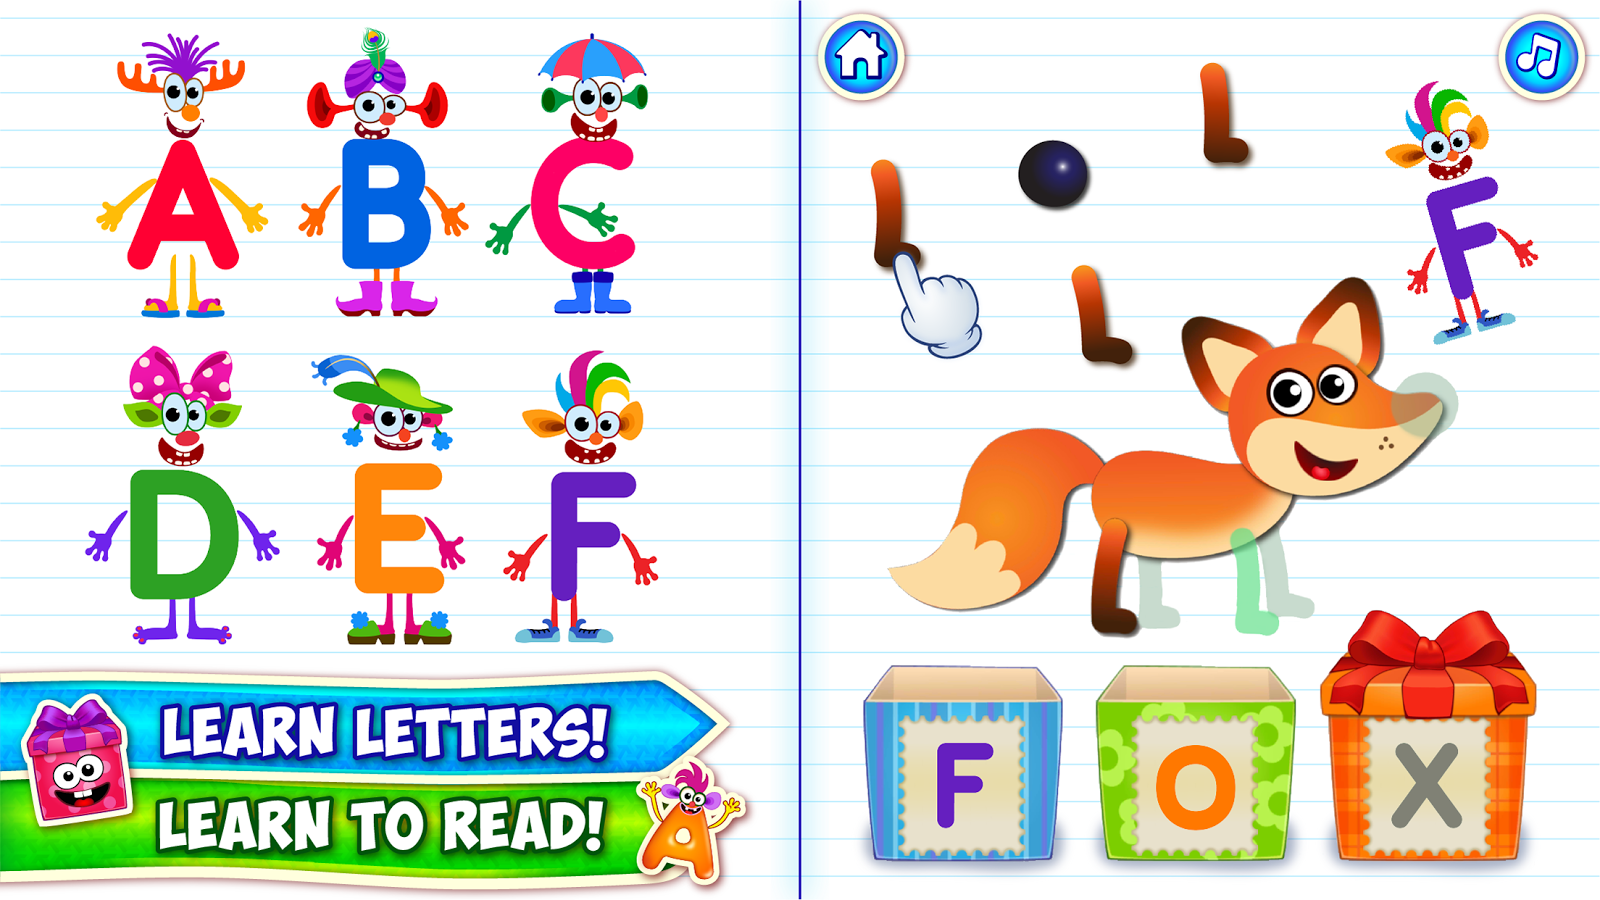 ABC in box The alphabet in boxes - Android Apps on Google Play